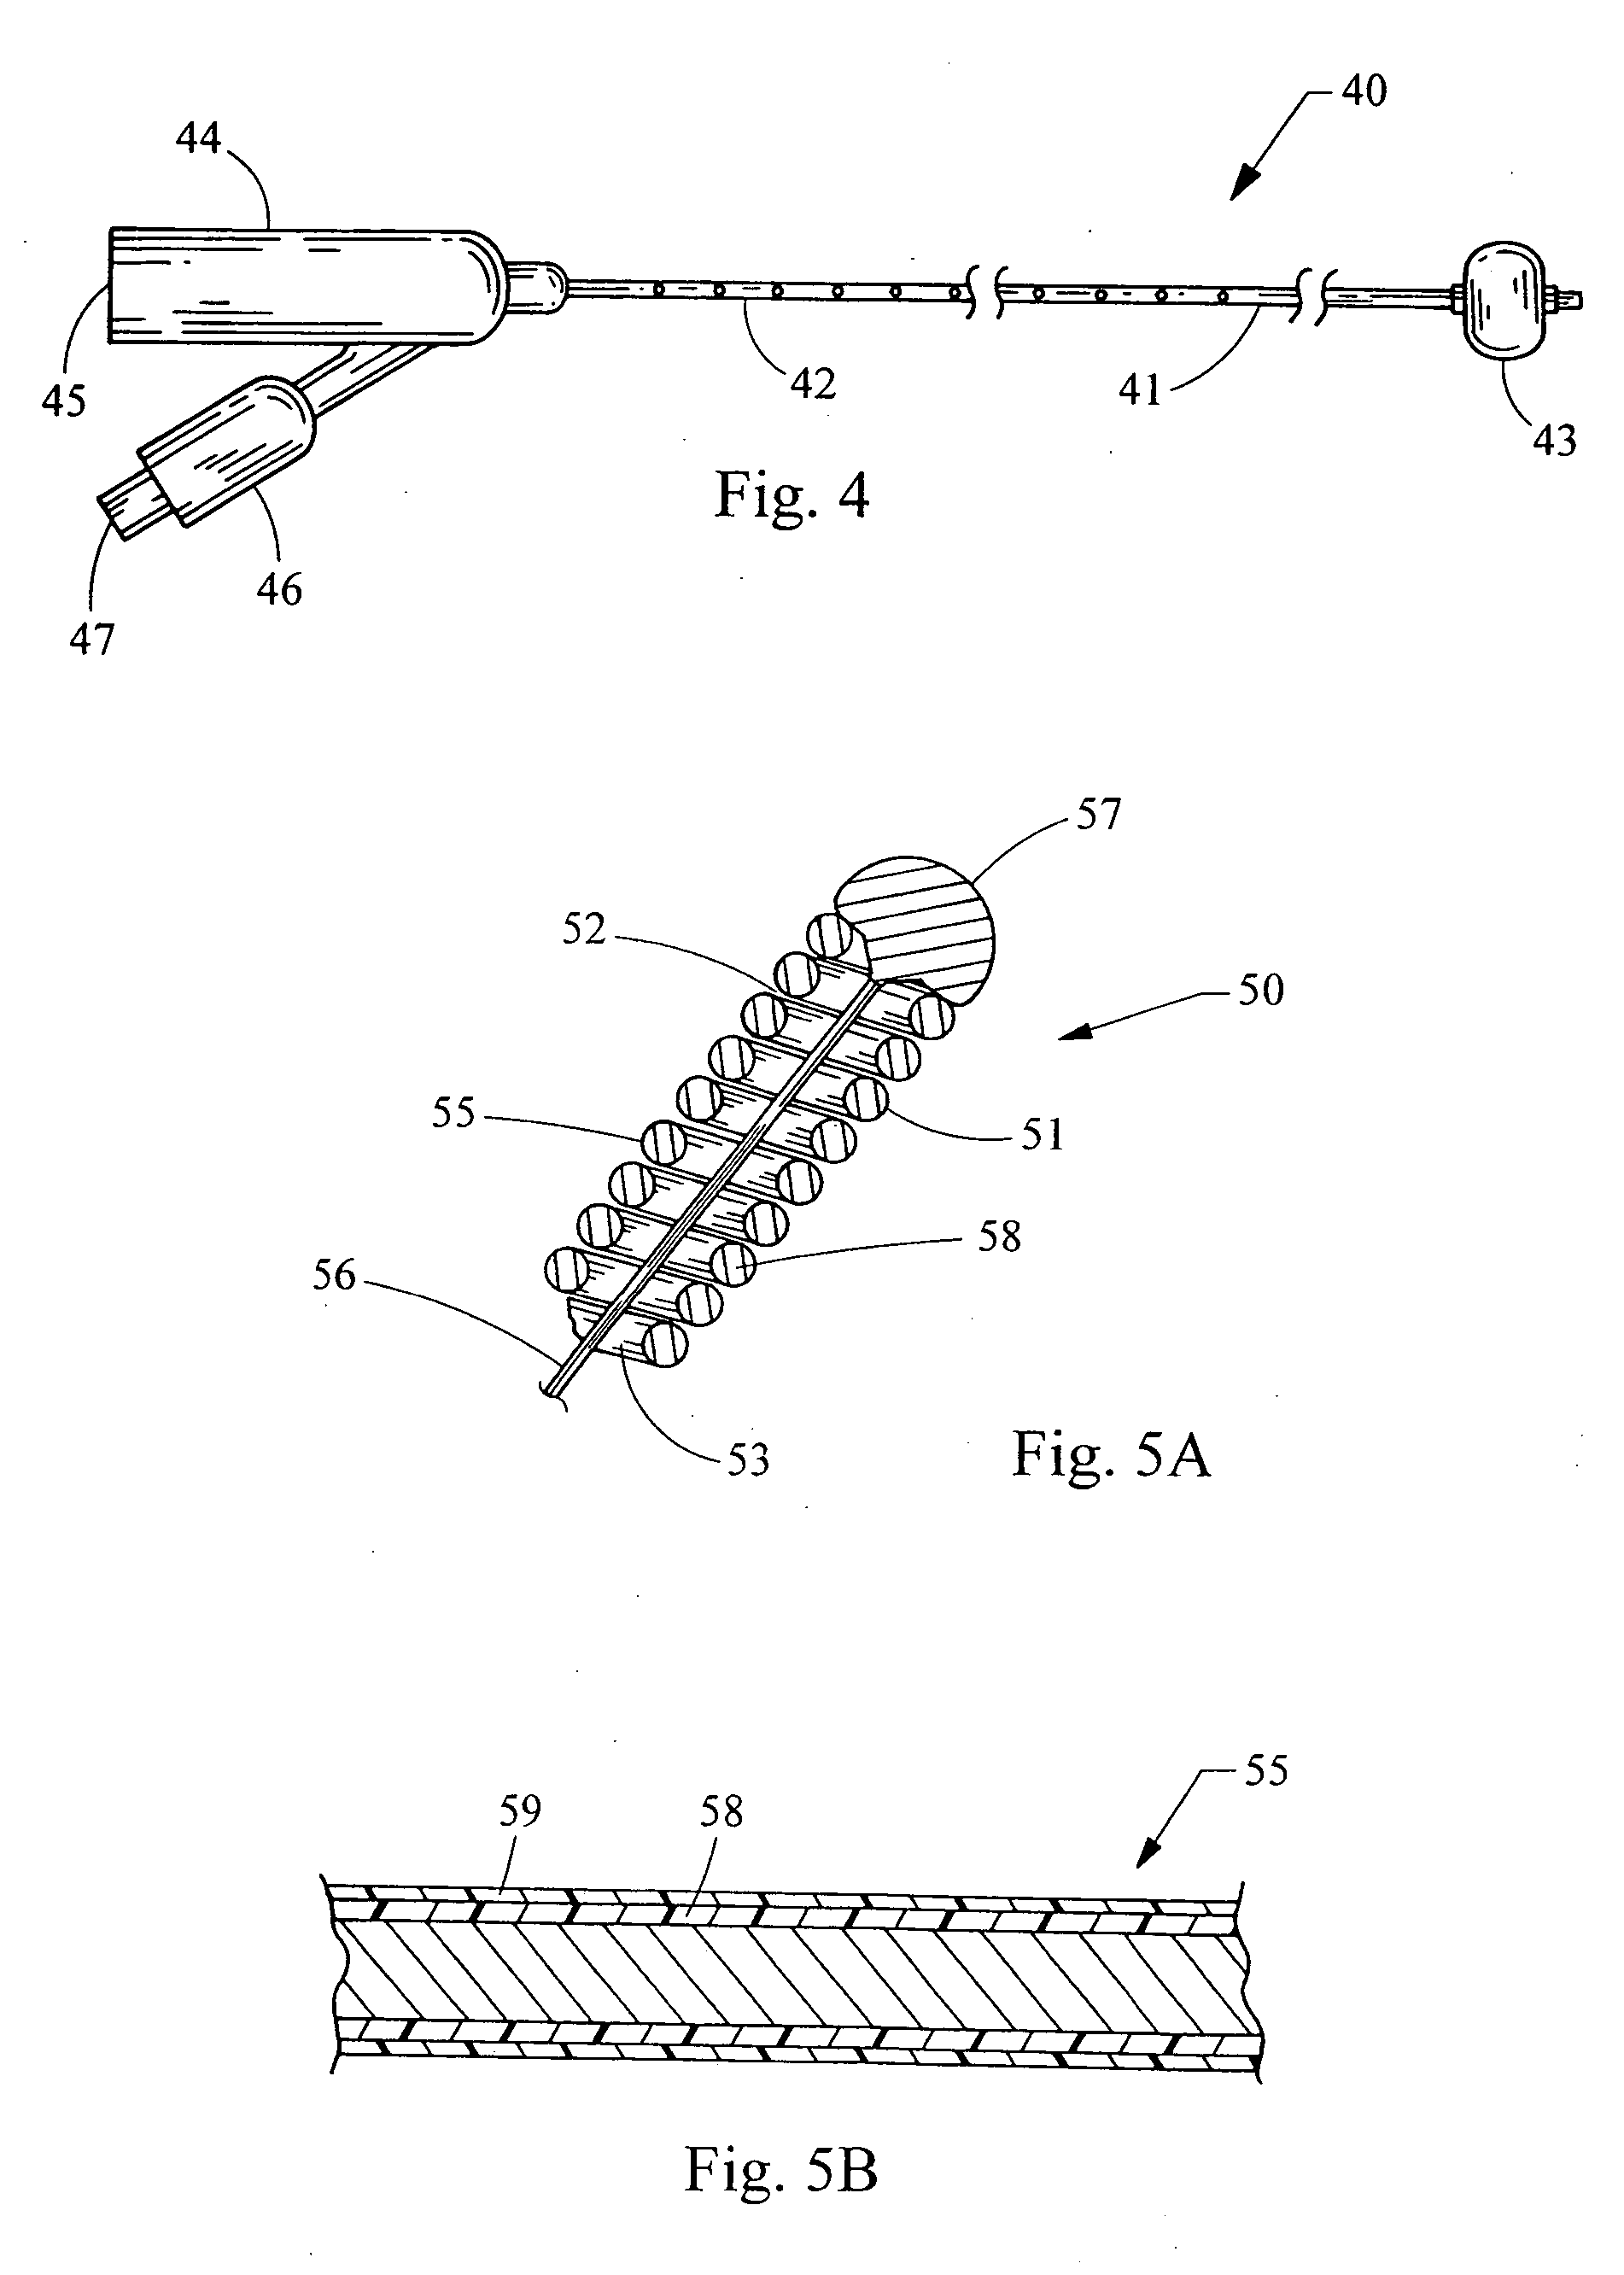 Implantable medical device with anti-neoplastic drug